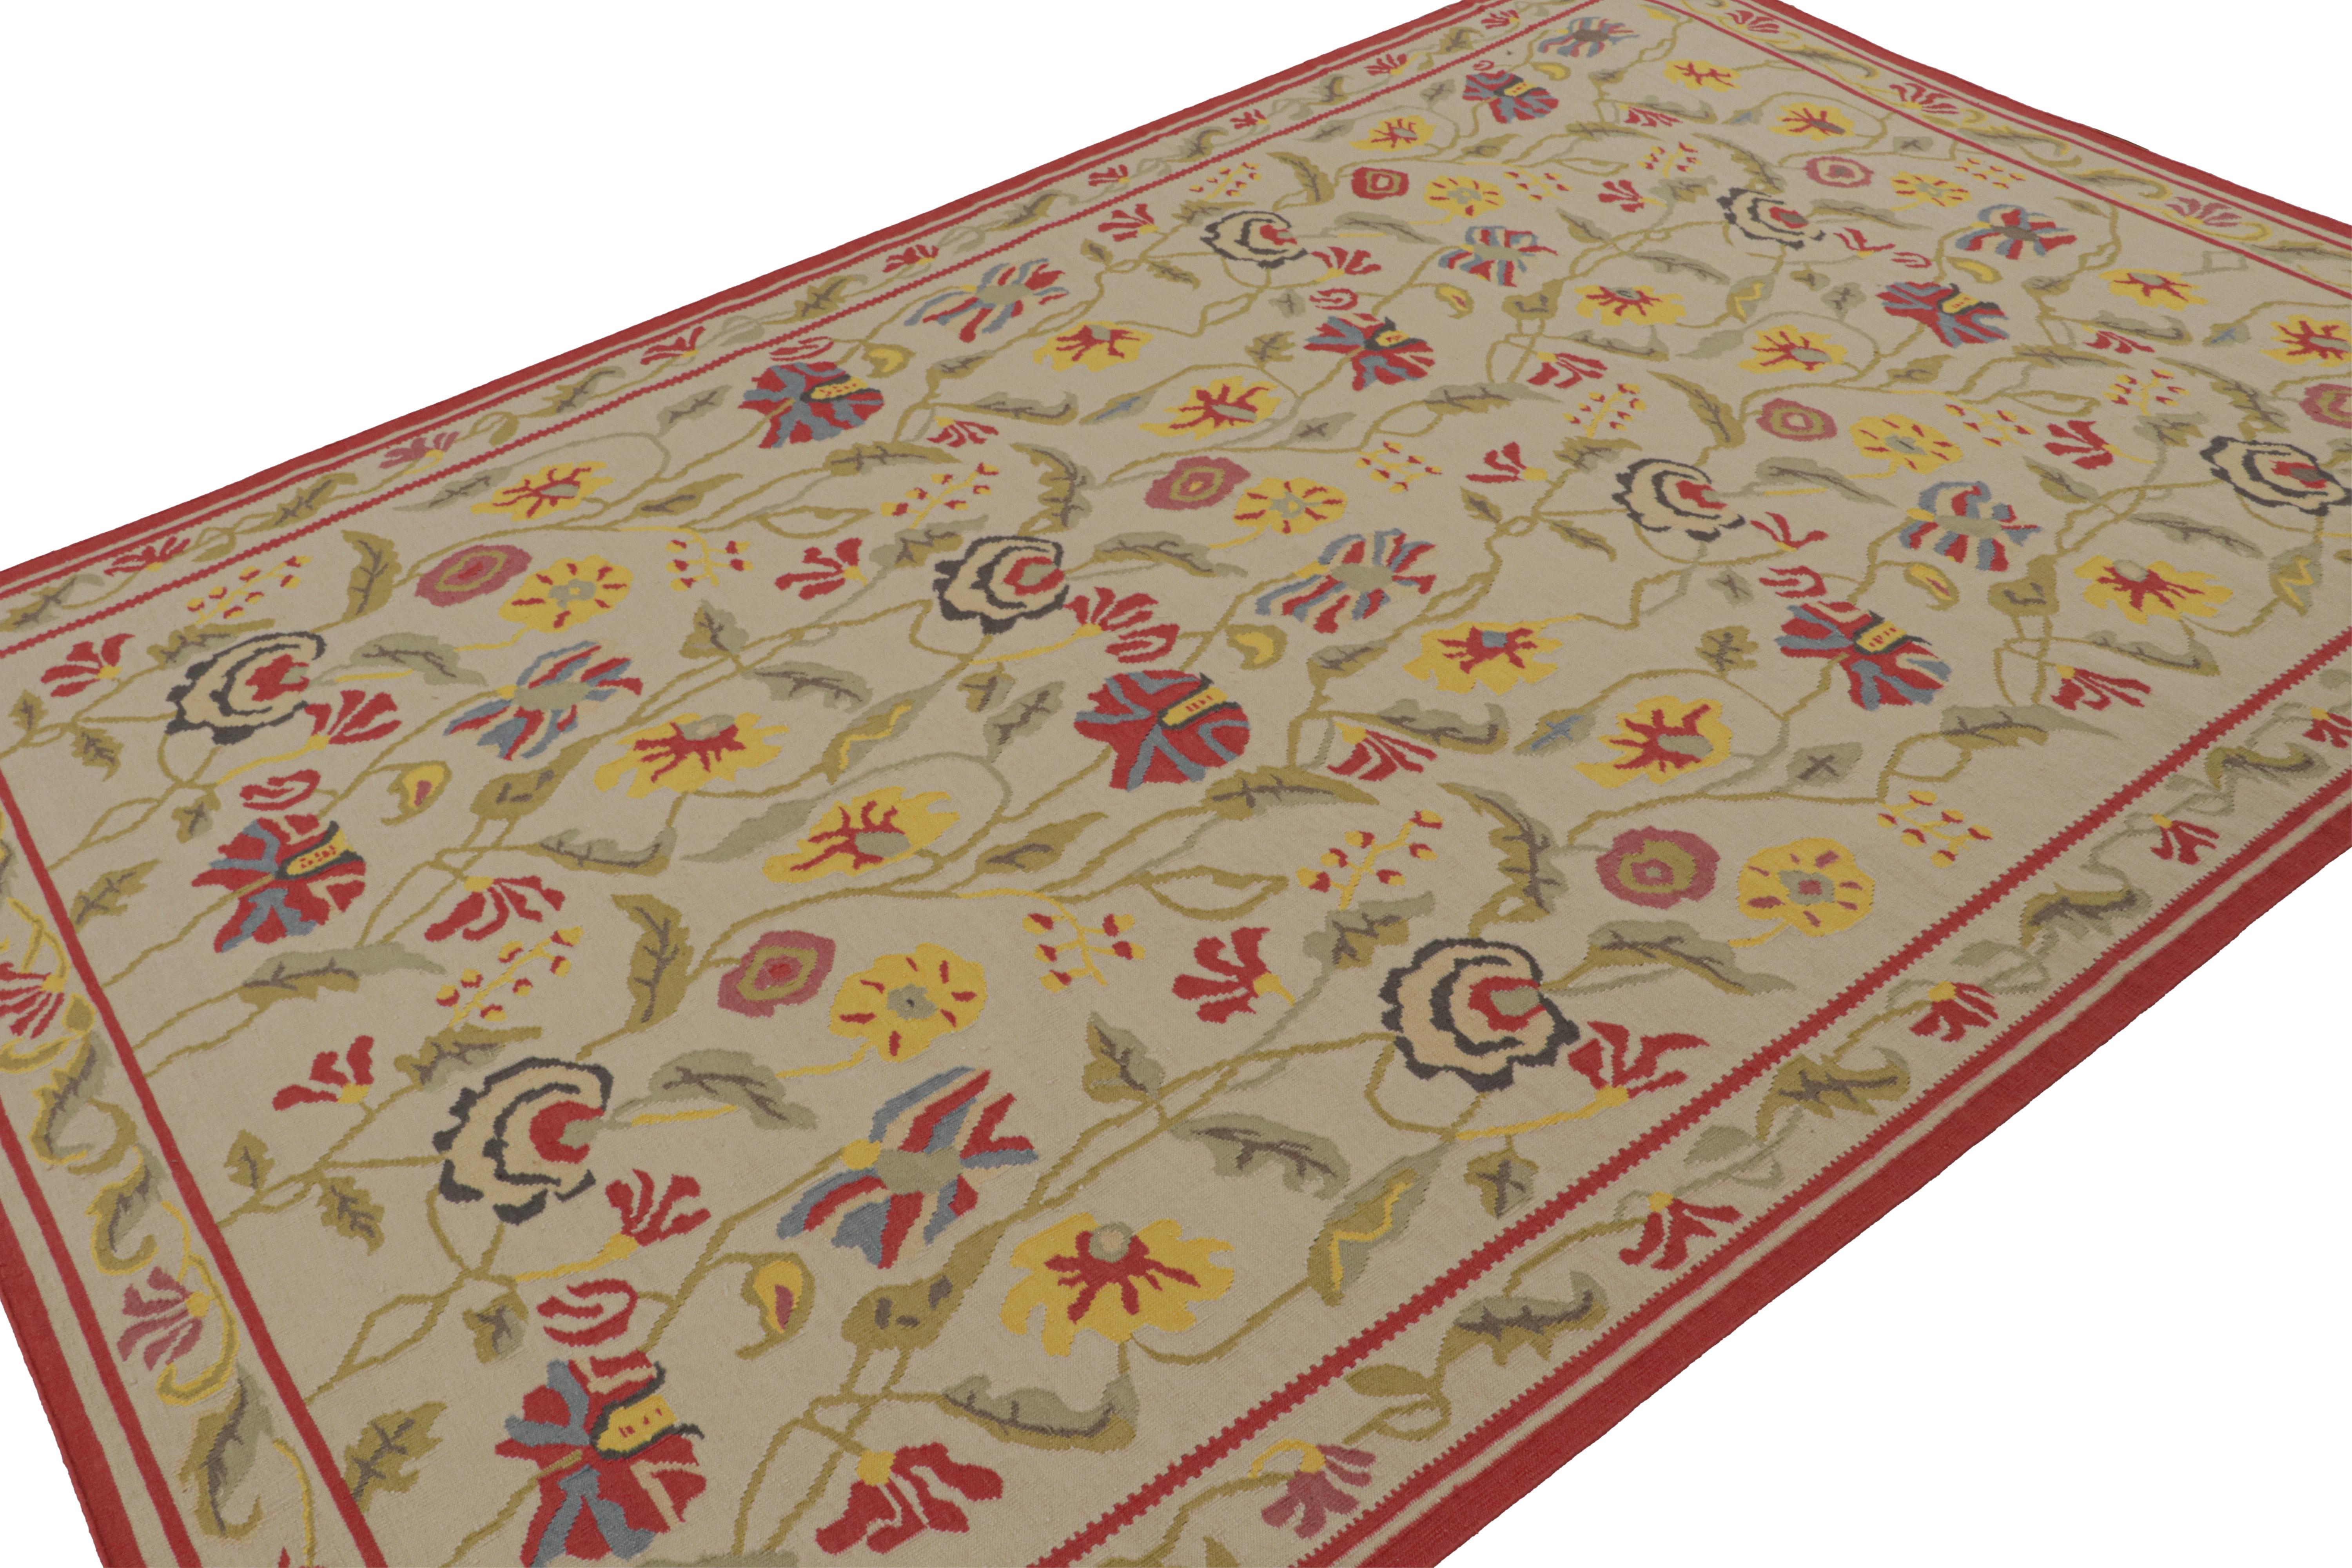 Hand-knotted in wool, this 7x9 contemporary kilim rug with floral patterns across the field has been inspired by rural Oriental flatweaves of Persian and Indian sensibility. 

On the Design: 

Resembling a modern take on vintage Indian Dhurrie